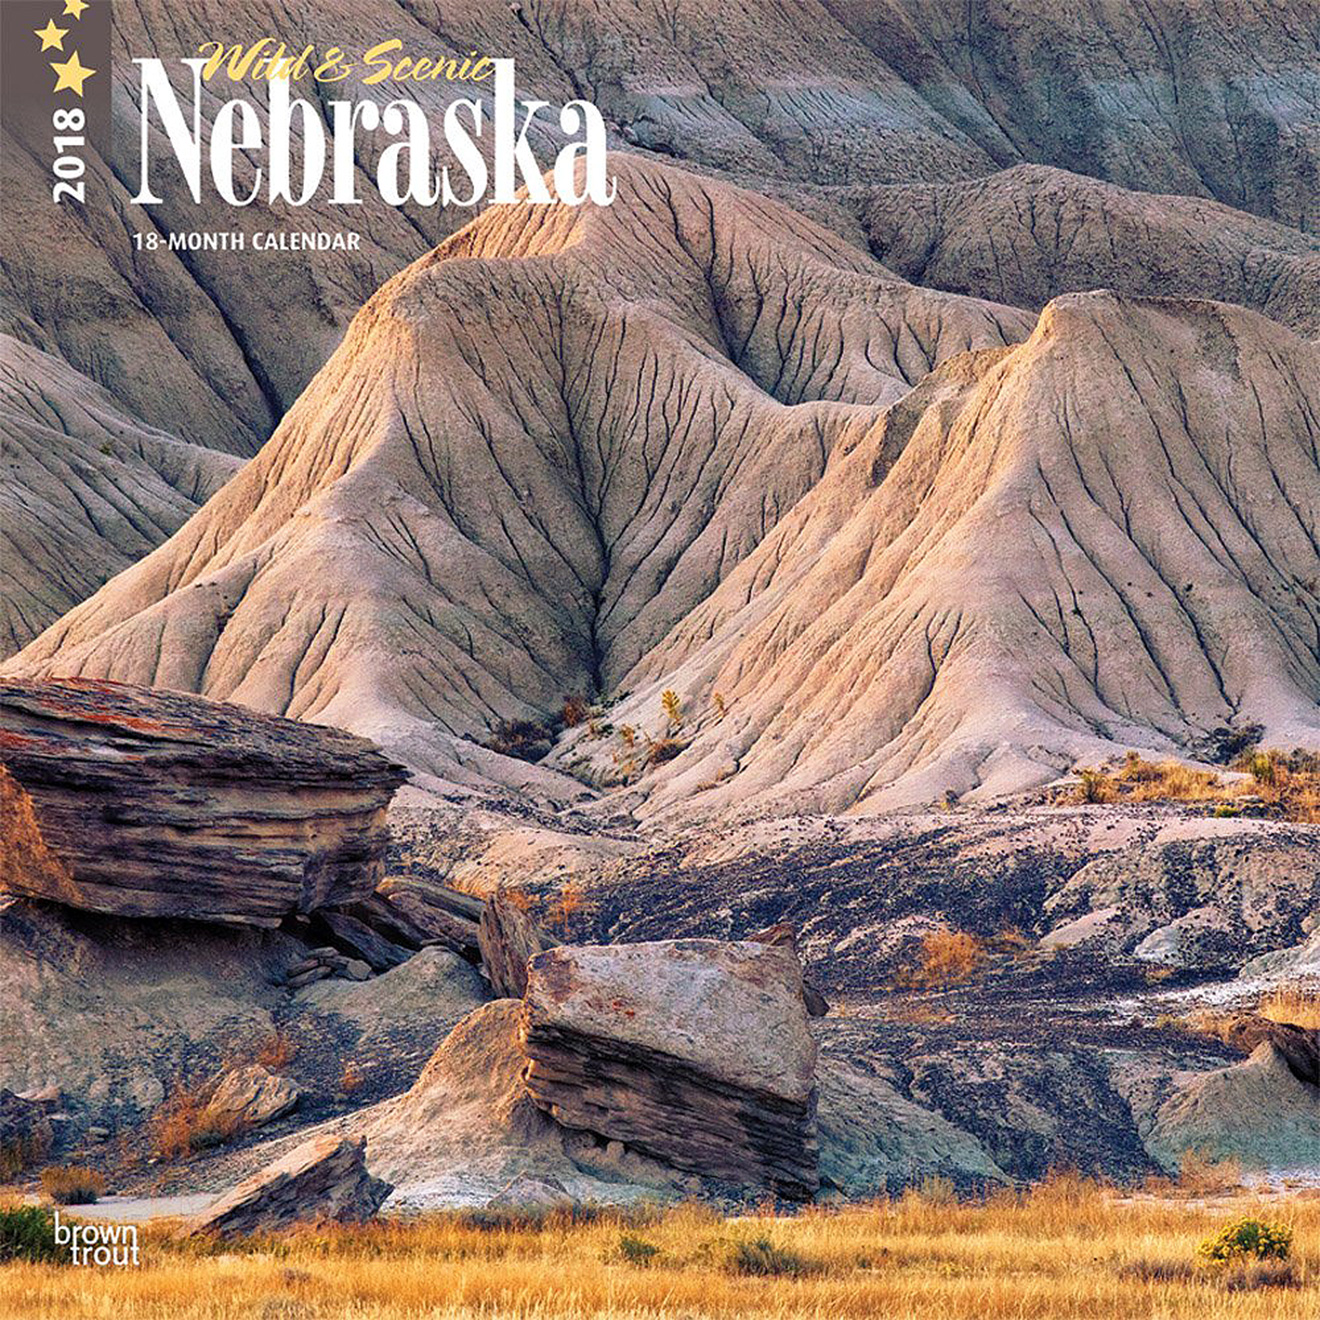 2018 Nebraska Calendar by Brown Trout.  Sold in Amazon, Retail Stores, and Calendar Club.  Contributed 6 Photographs Including Cover. - Tear Sheet Photograph